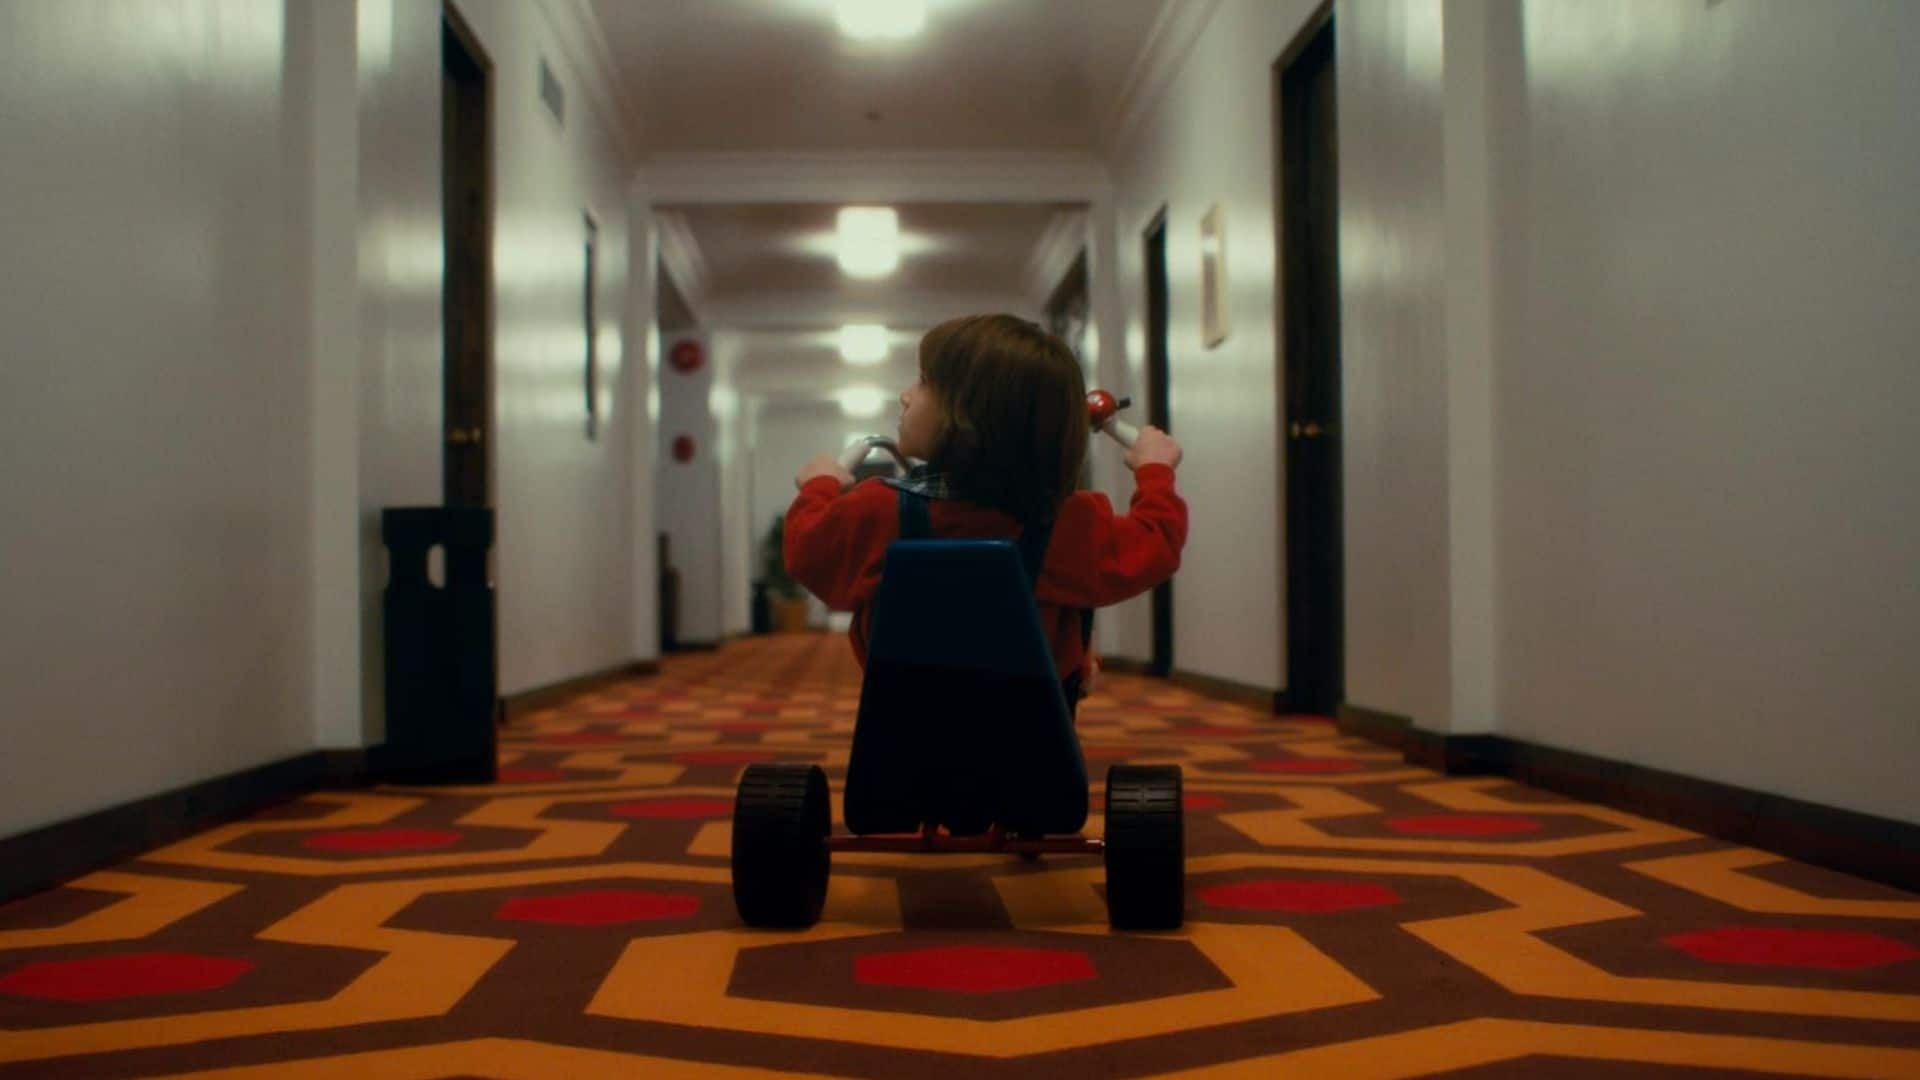 A young boy rides on a tricycle in a hotel hallway in this image from Warner Bros. Pictures.